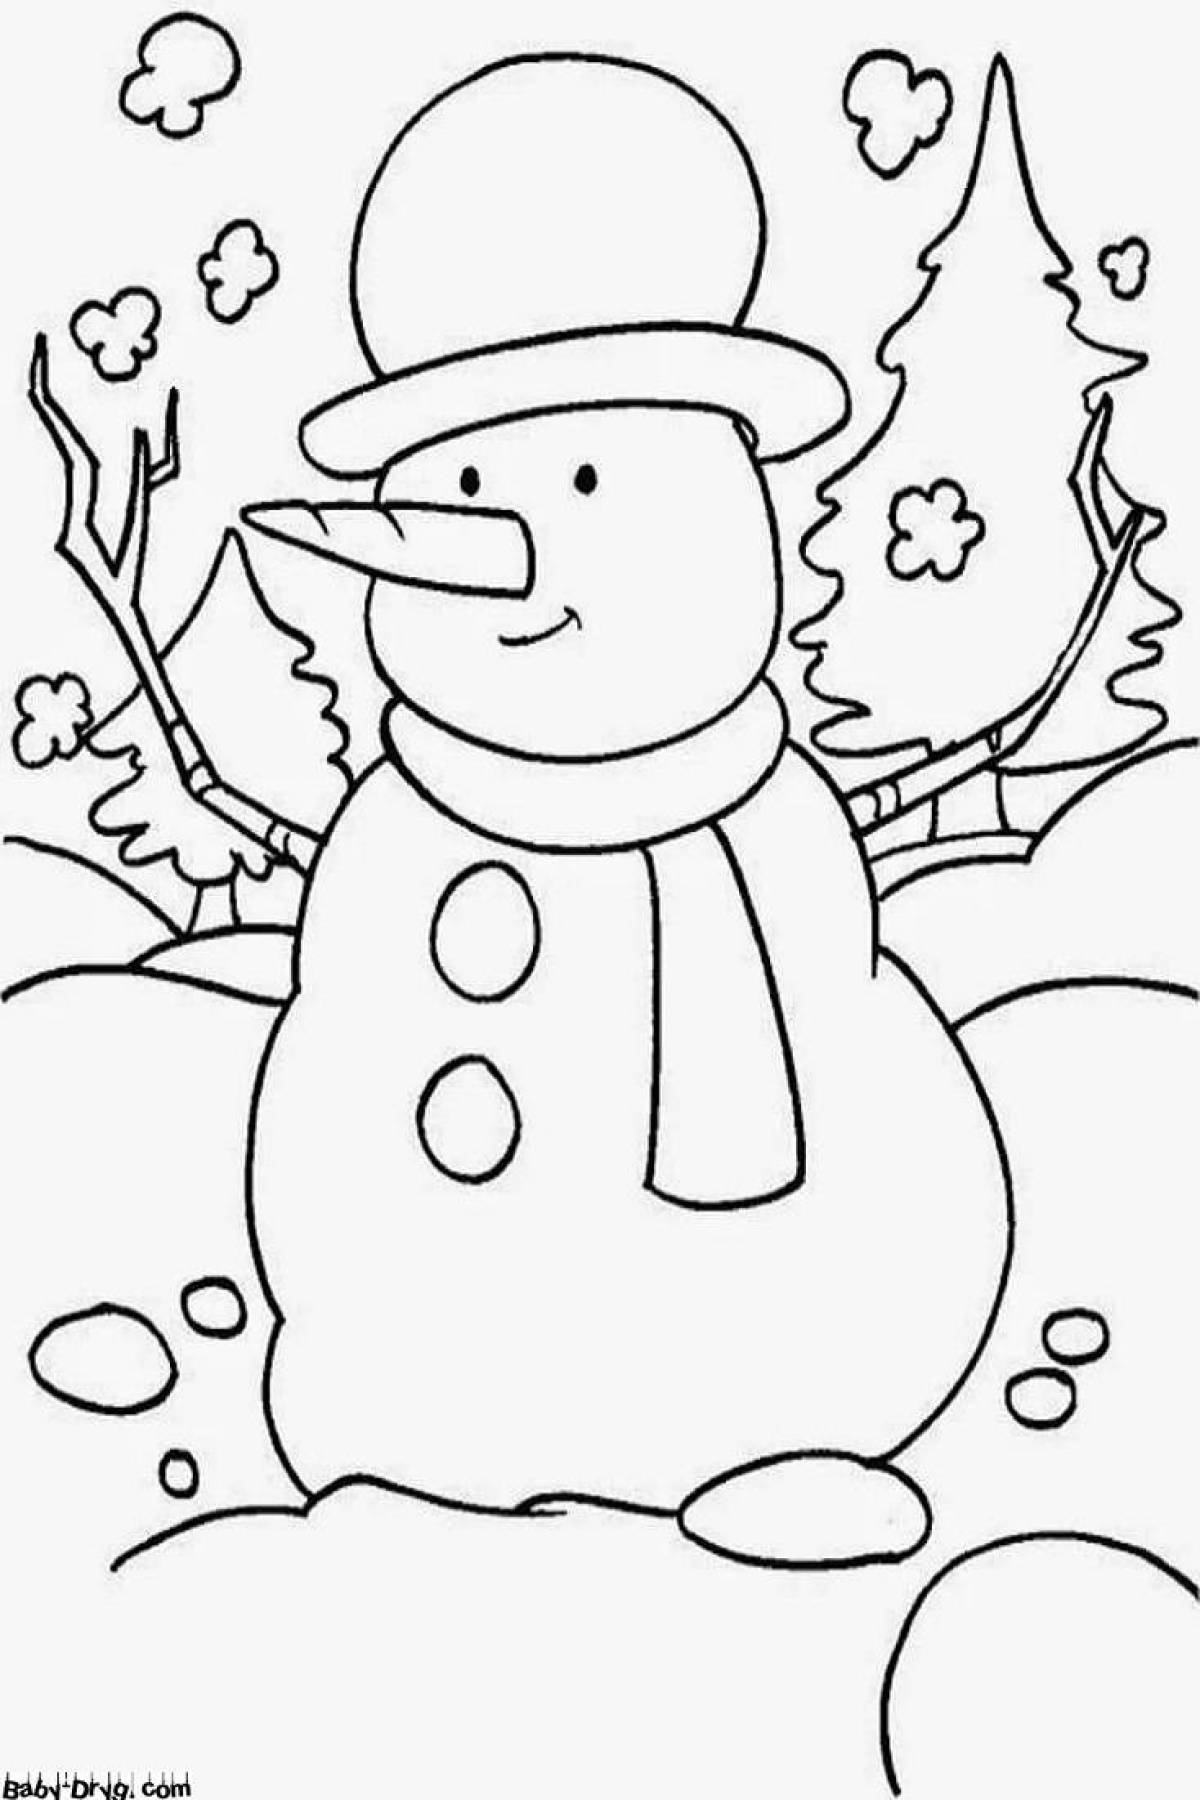 Cheerful snowman coloring for children